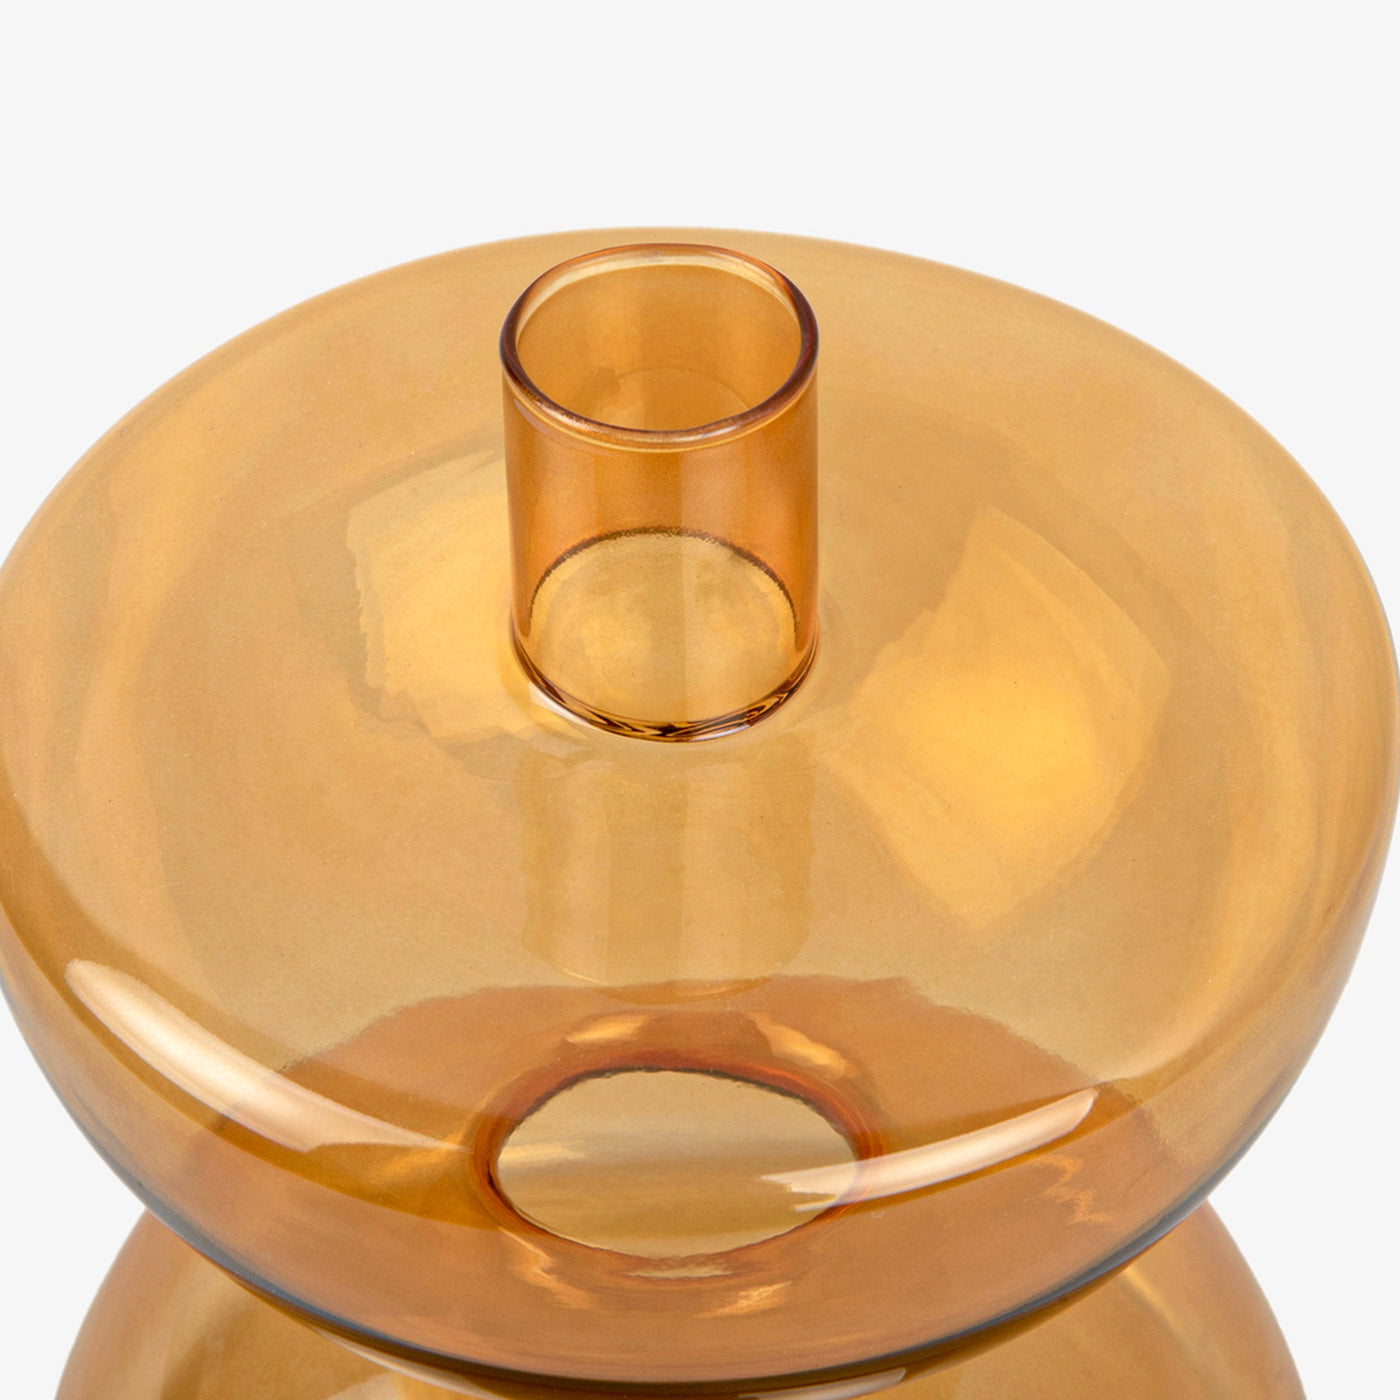 Duplik Candle Holder, Glass, Ochre Yellow, L Candle Holders sazy.com